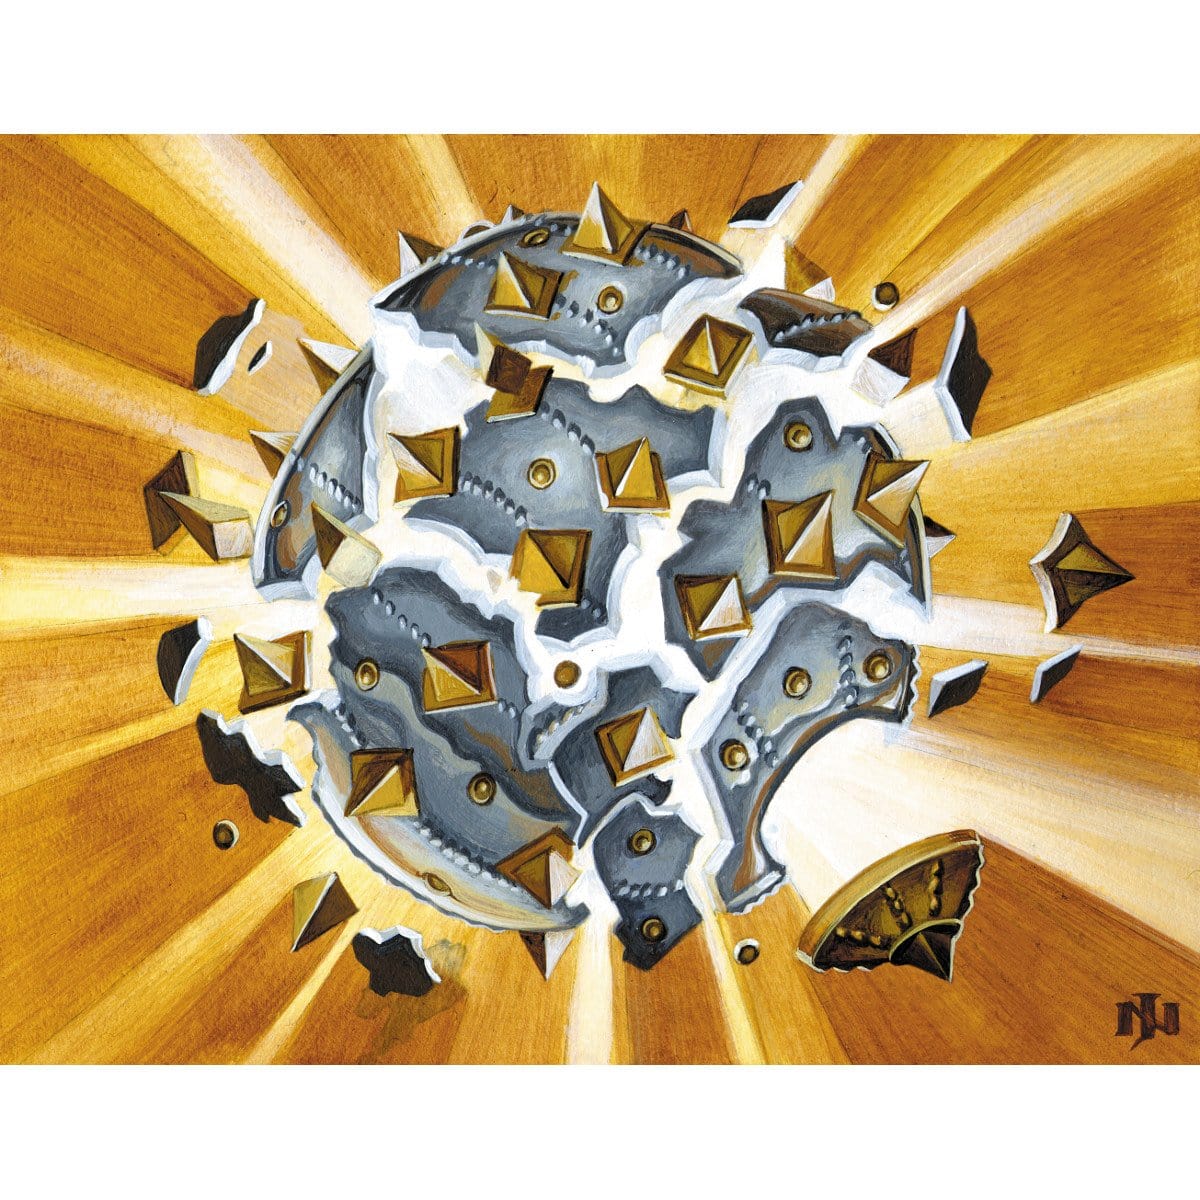 Sunbeam Spellbomb Print - Print - Original Magic Art - Accessories for Magic the Gathering and other card games